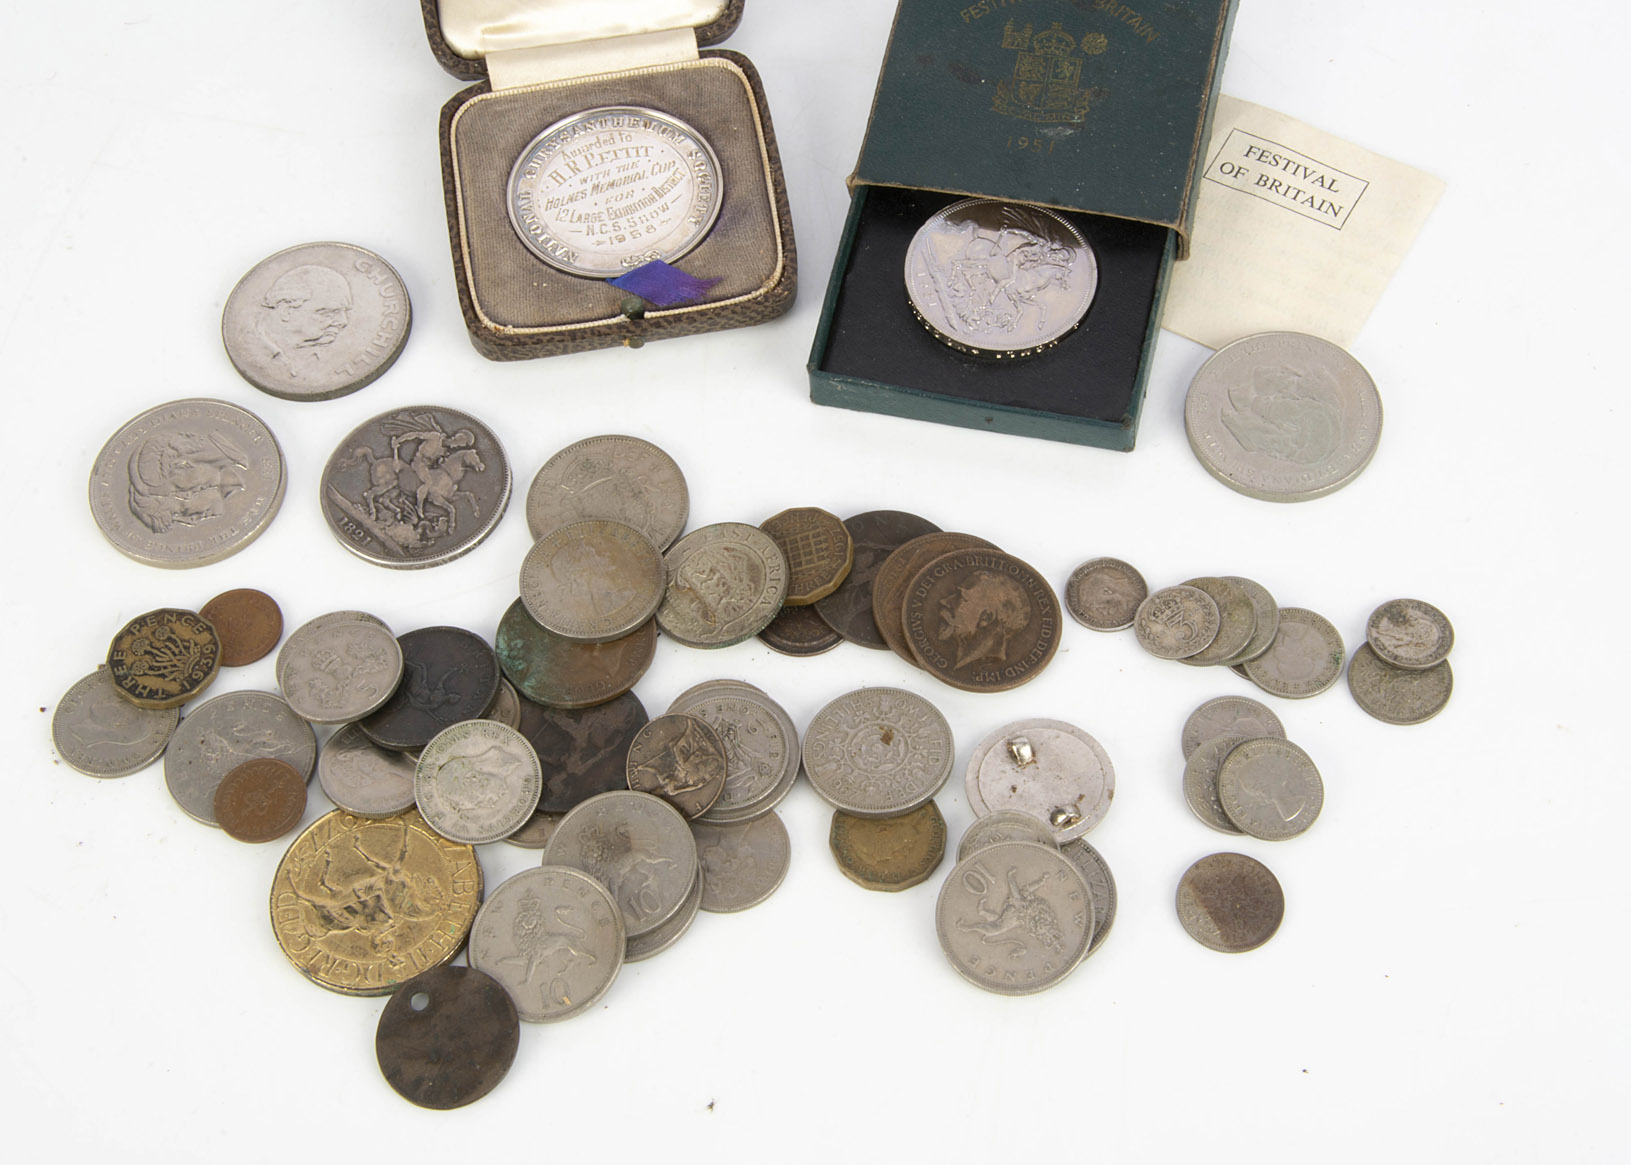 A small collection of coins and more, including an 1821 crown, an 1806 half penny, and more, also